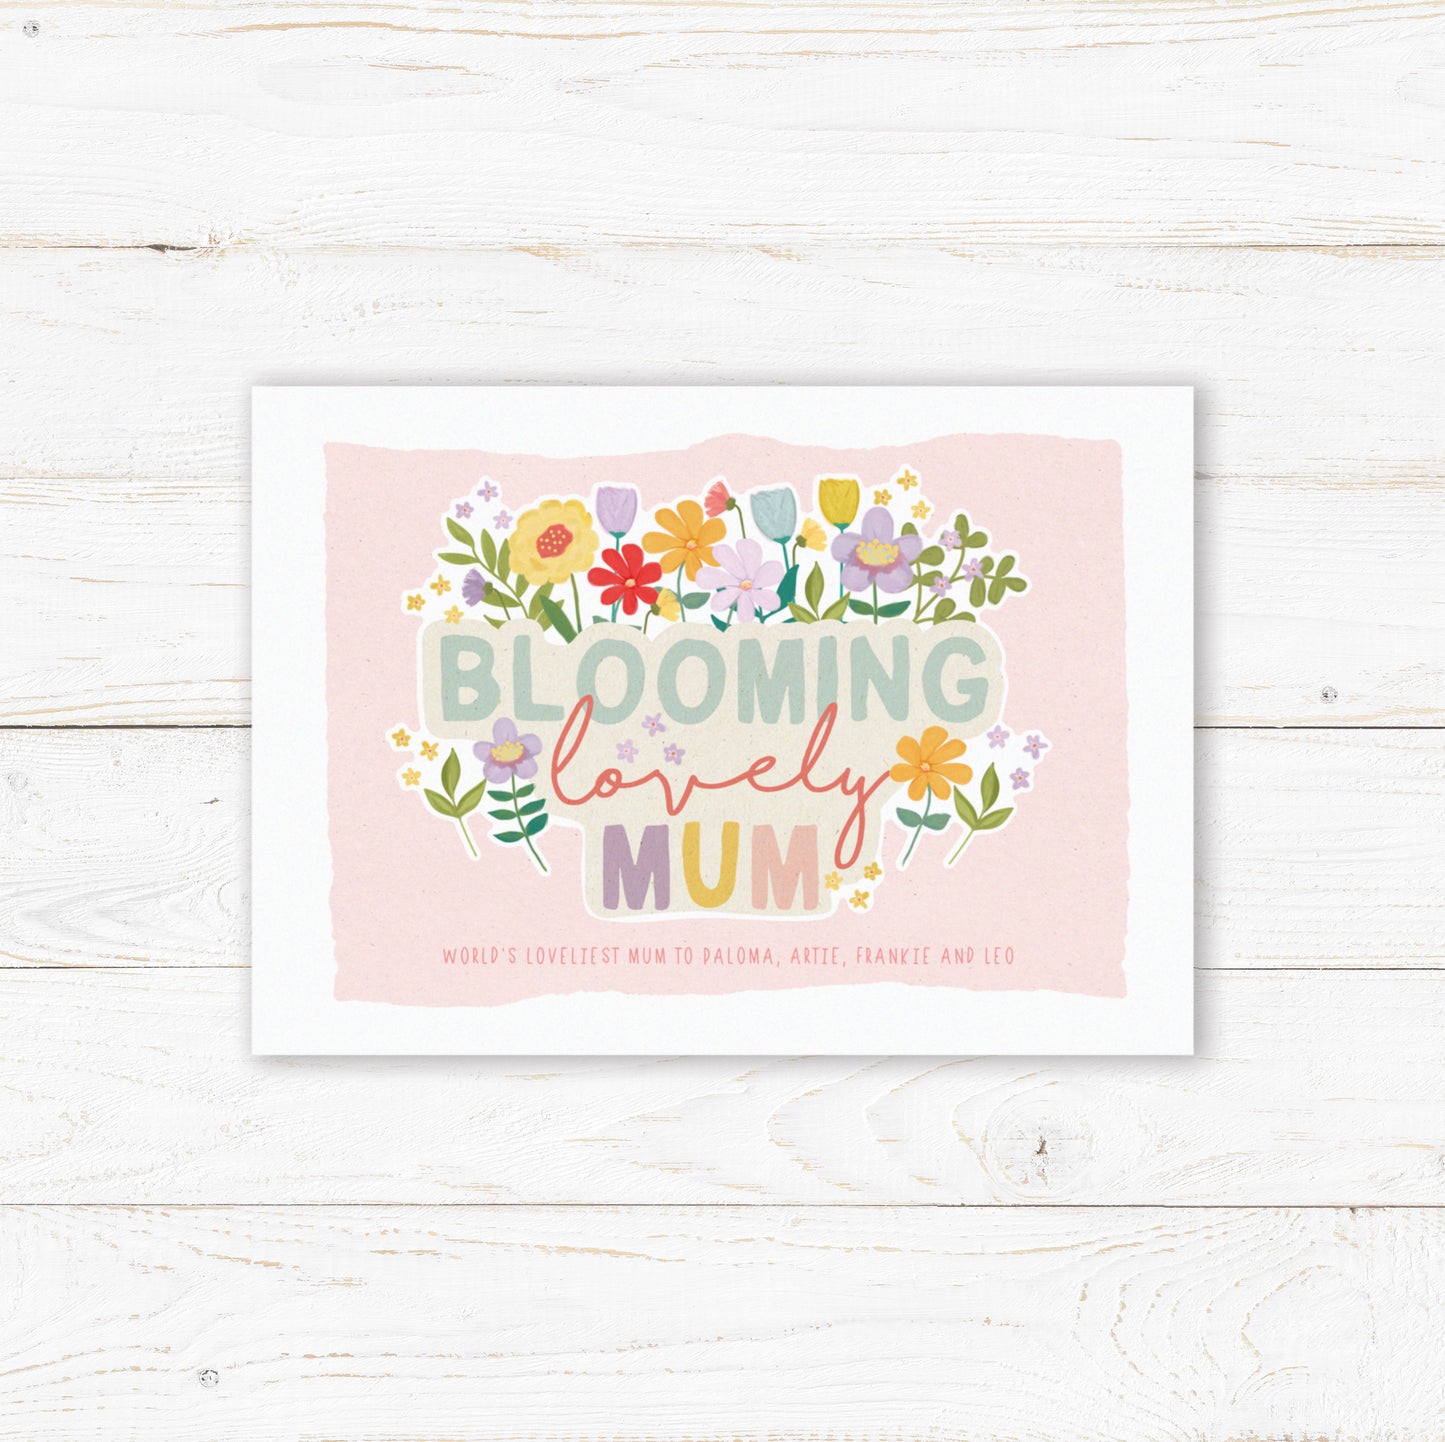 Blooming Lovely Mum Print. Mother's Day Personalised Wall Print. Floral Mum Wall Print. Lovely Gift for Mum.